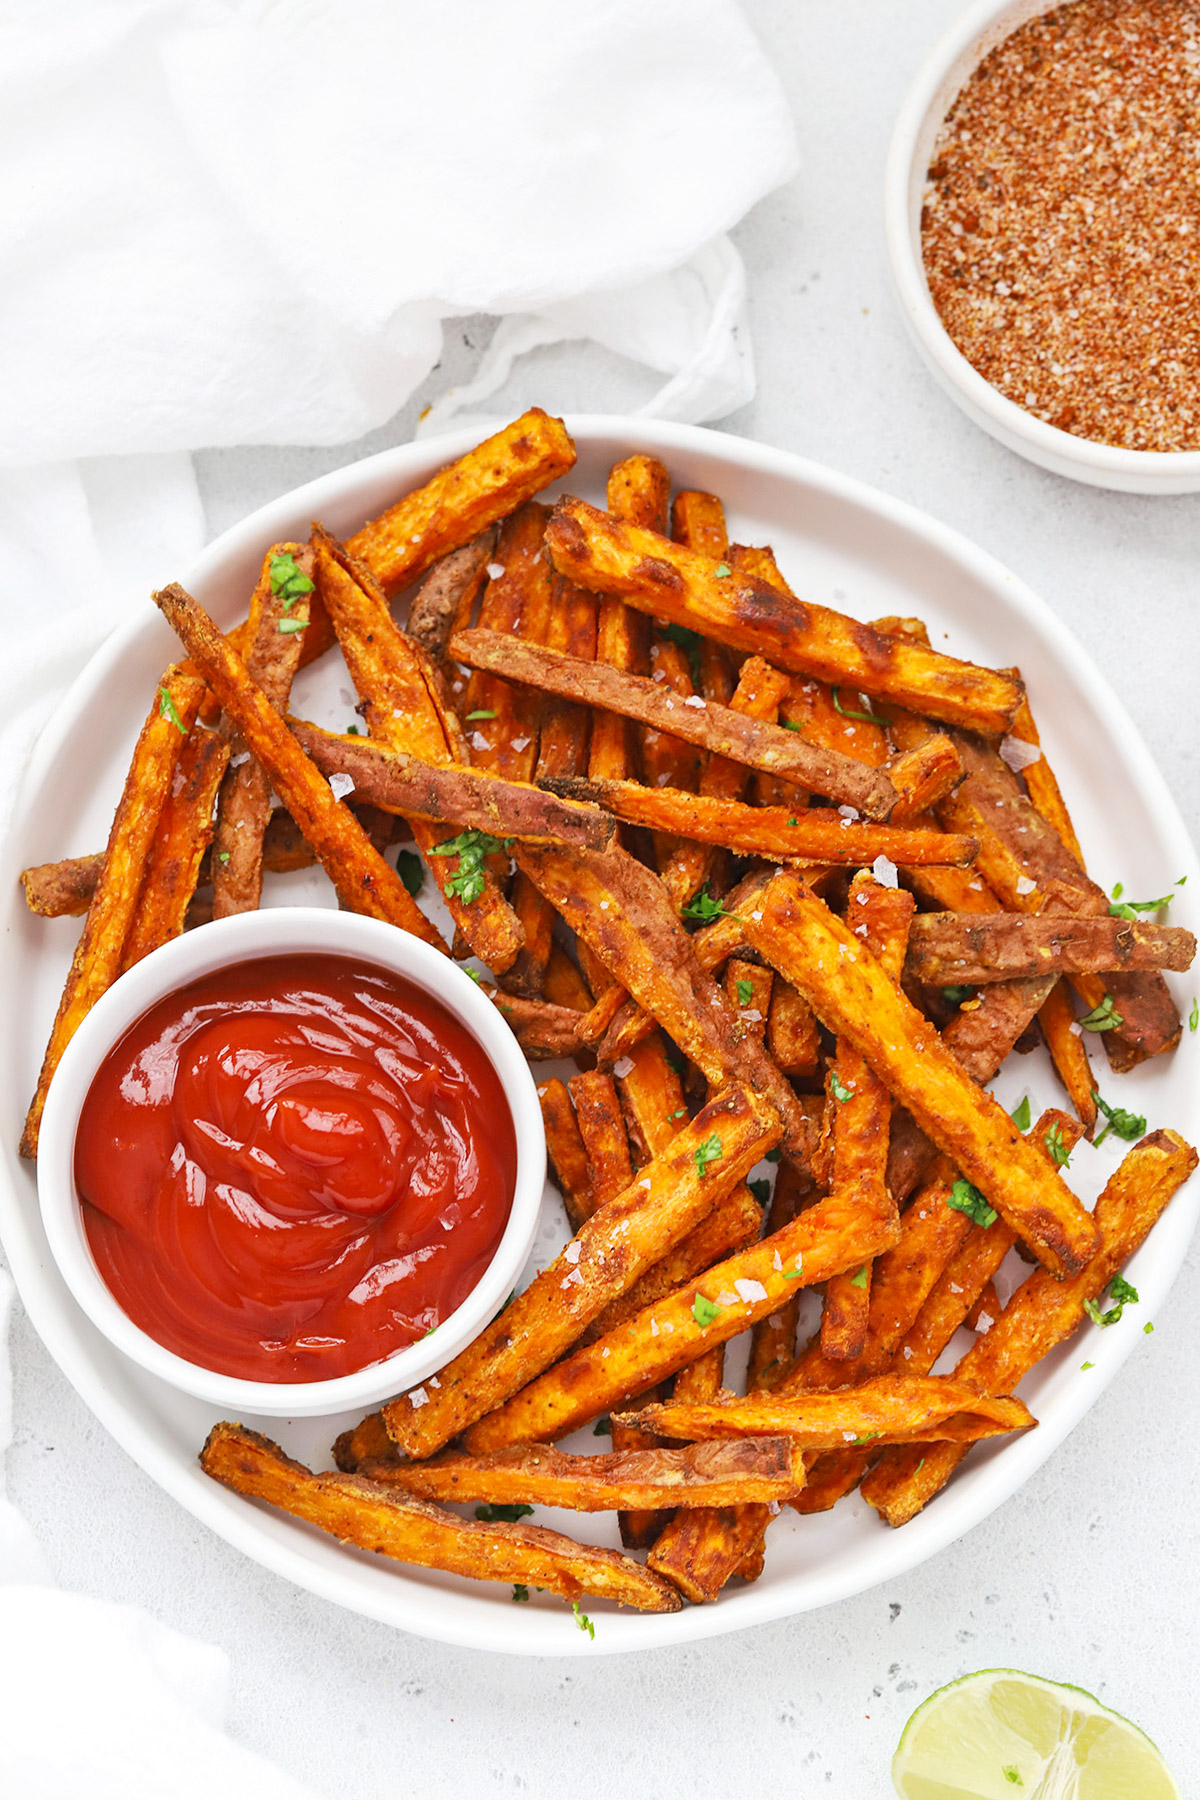 Overhead view of crispy baked sweet potato fries served with ketchup